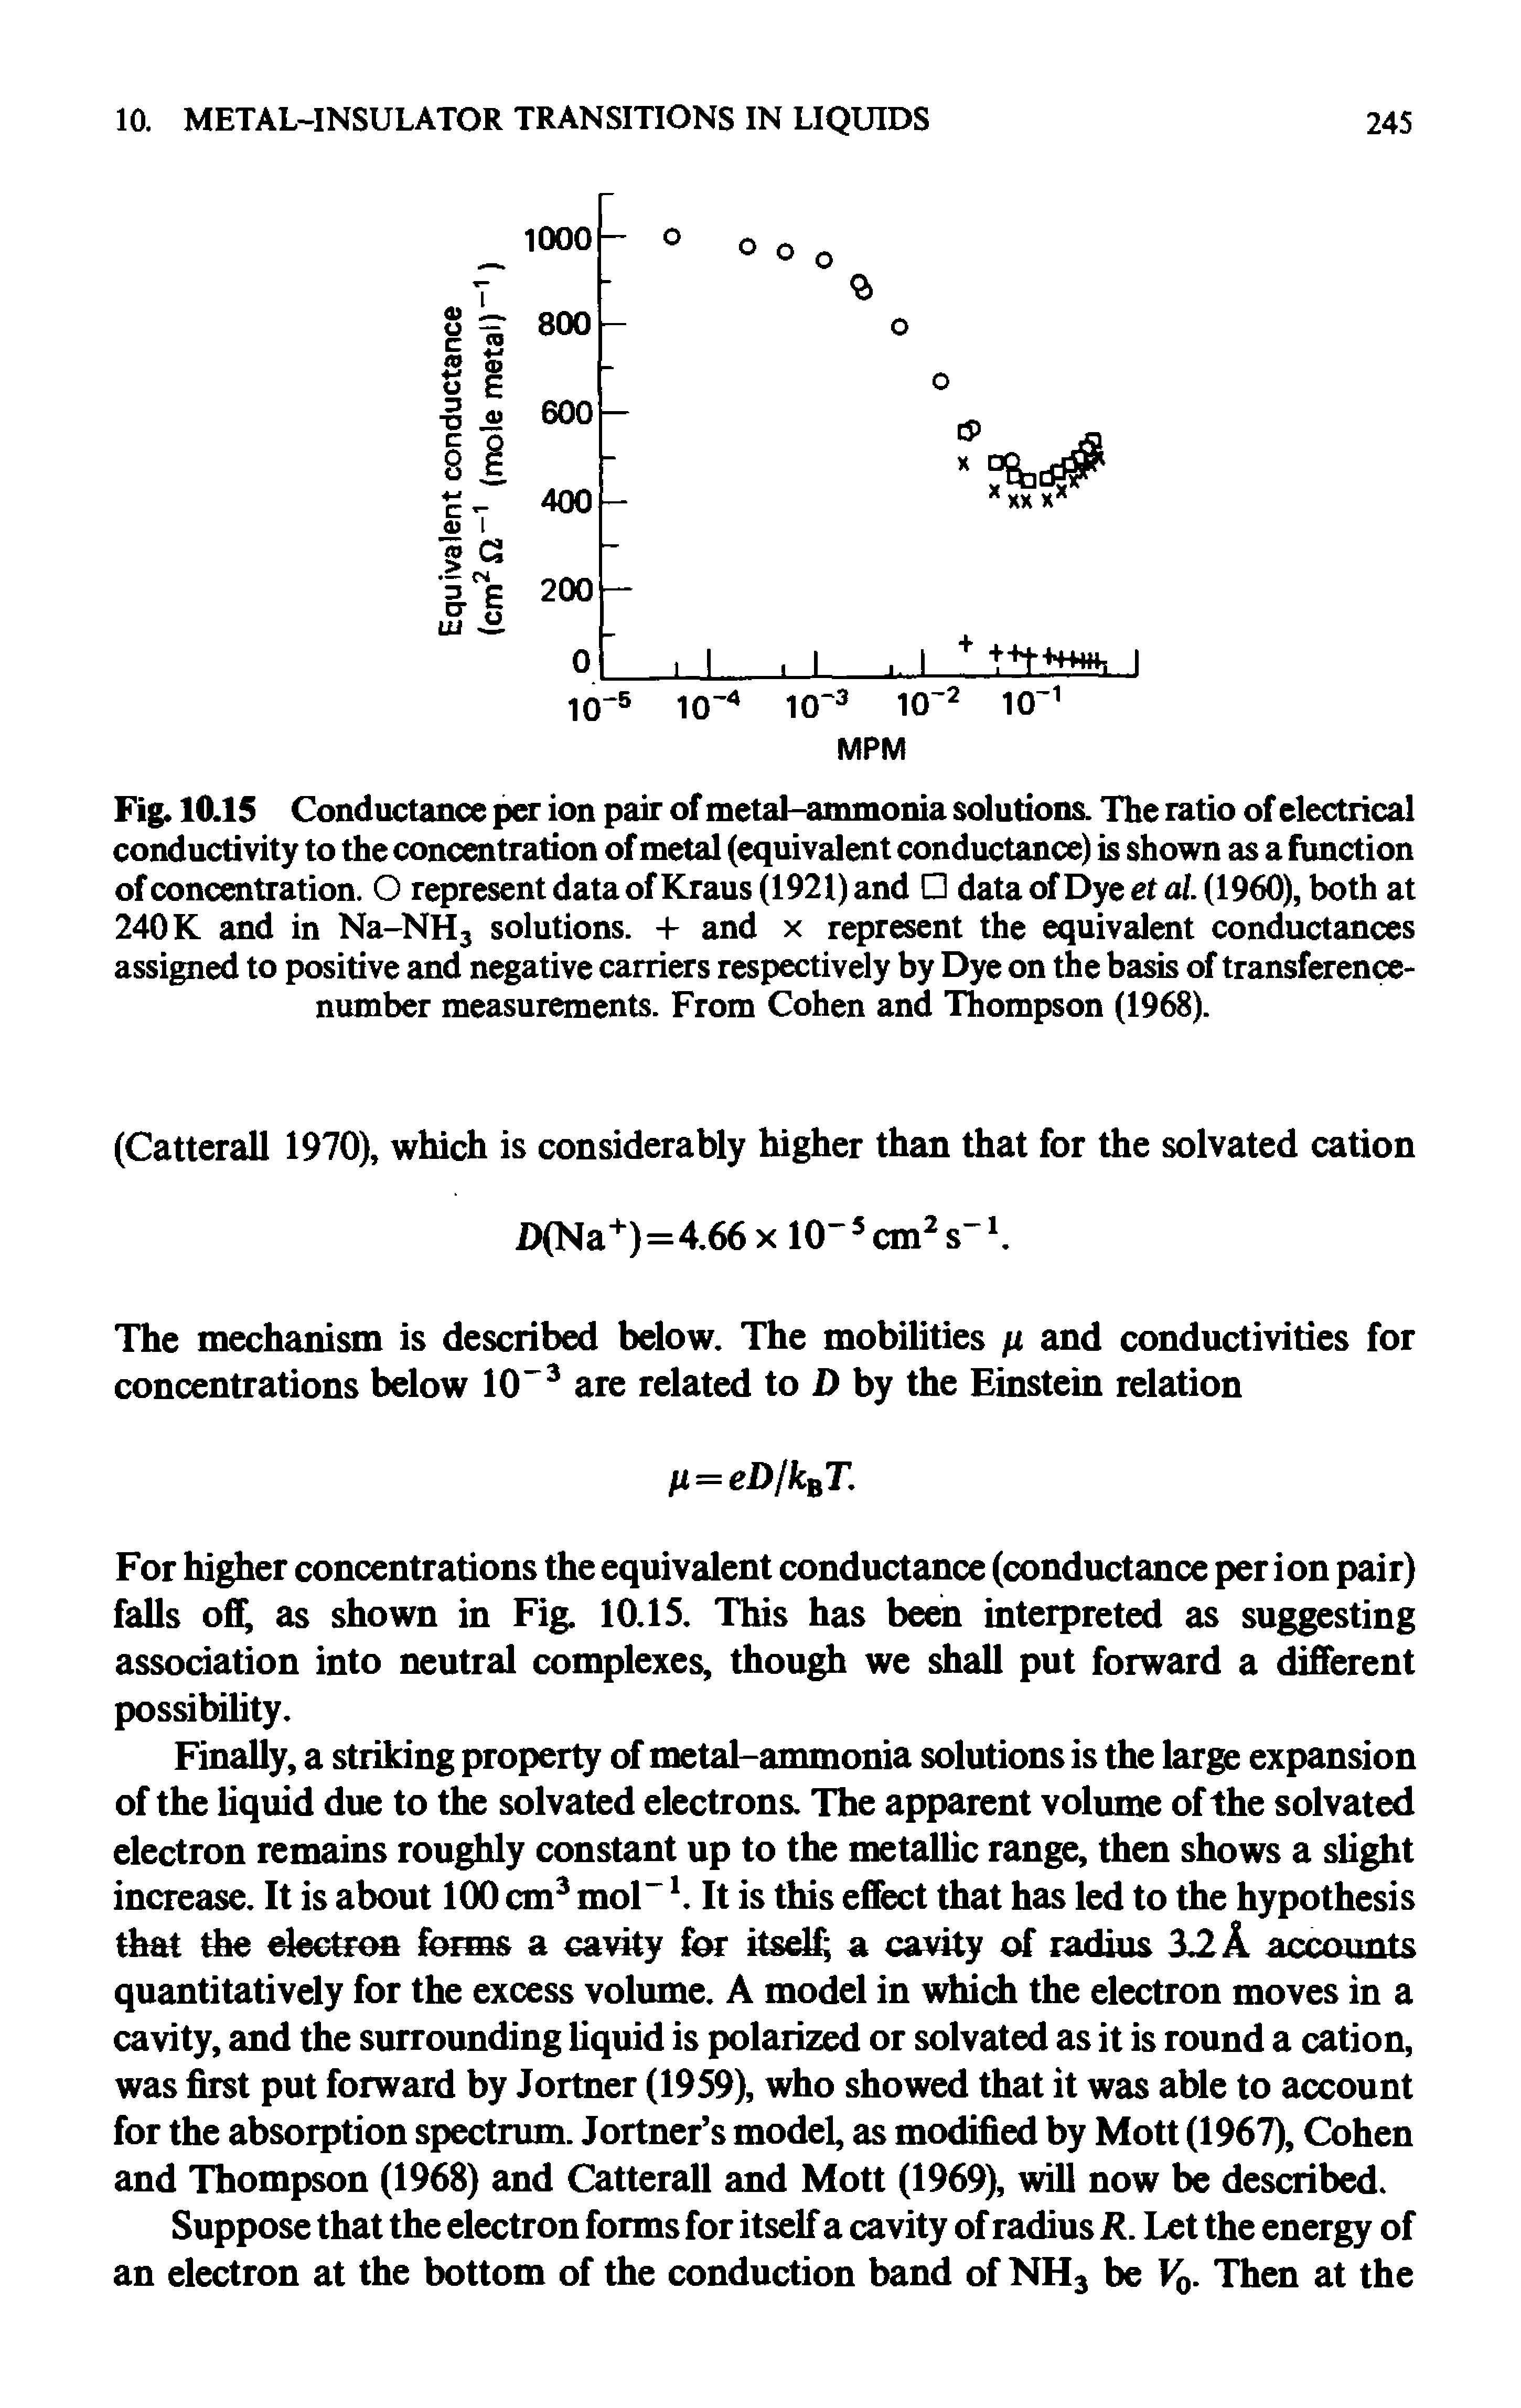 Fig. 10.15 Conductance per ion pair of metal-ammonia solutions. The ratio of electrical conductivity to the concentration of metal (equivalent conductance) is shown as a function of concentration. O represent data of Kraus (1921) and data of Dye et al. (I960), both at 240 K and in Na-NH3 solutions. + and x represent the equivalent conductances assigned to positive and negative carriers respectively by Dye on the basis of transference-number measurements. From Cohen and Thompson (1968).